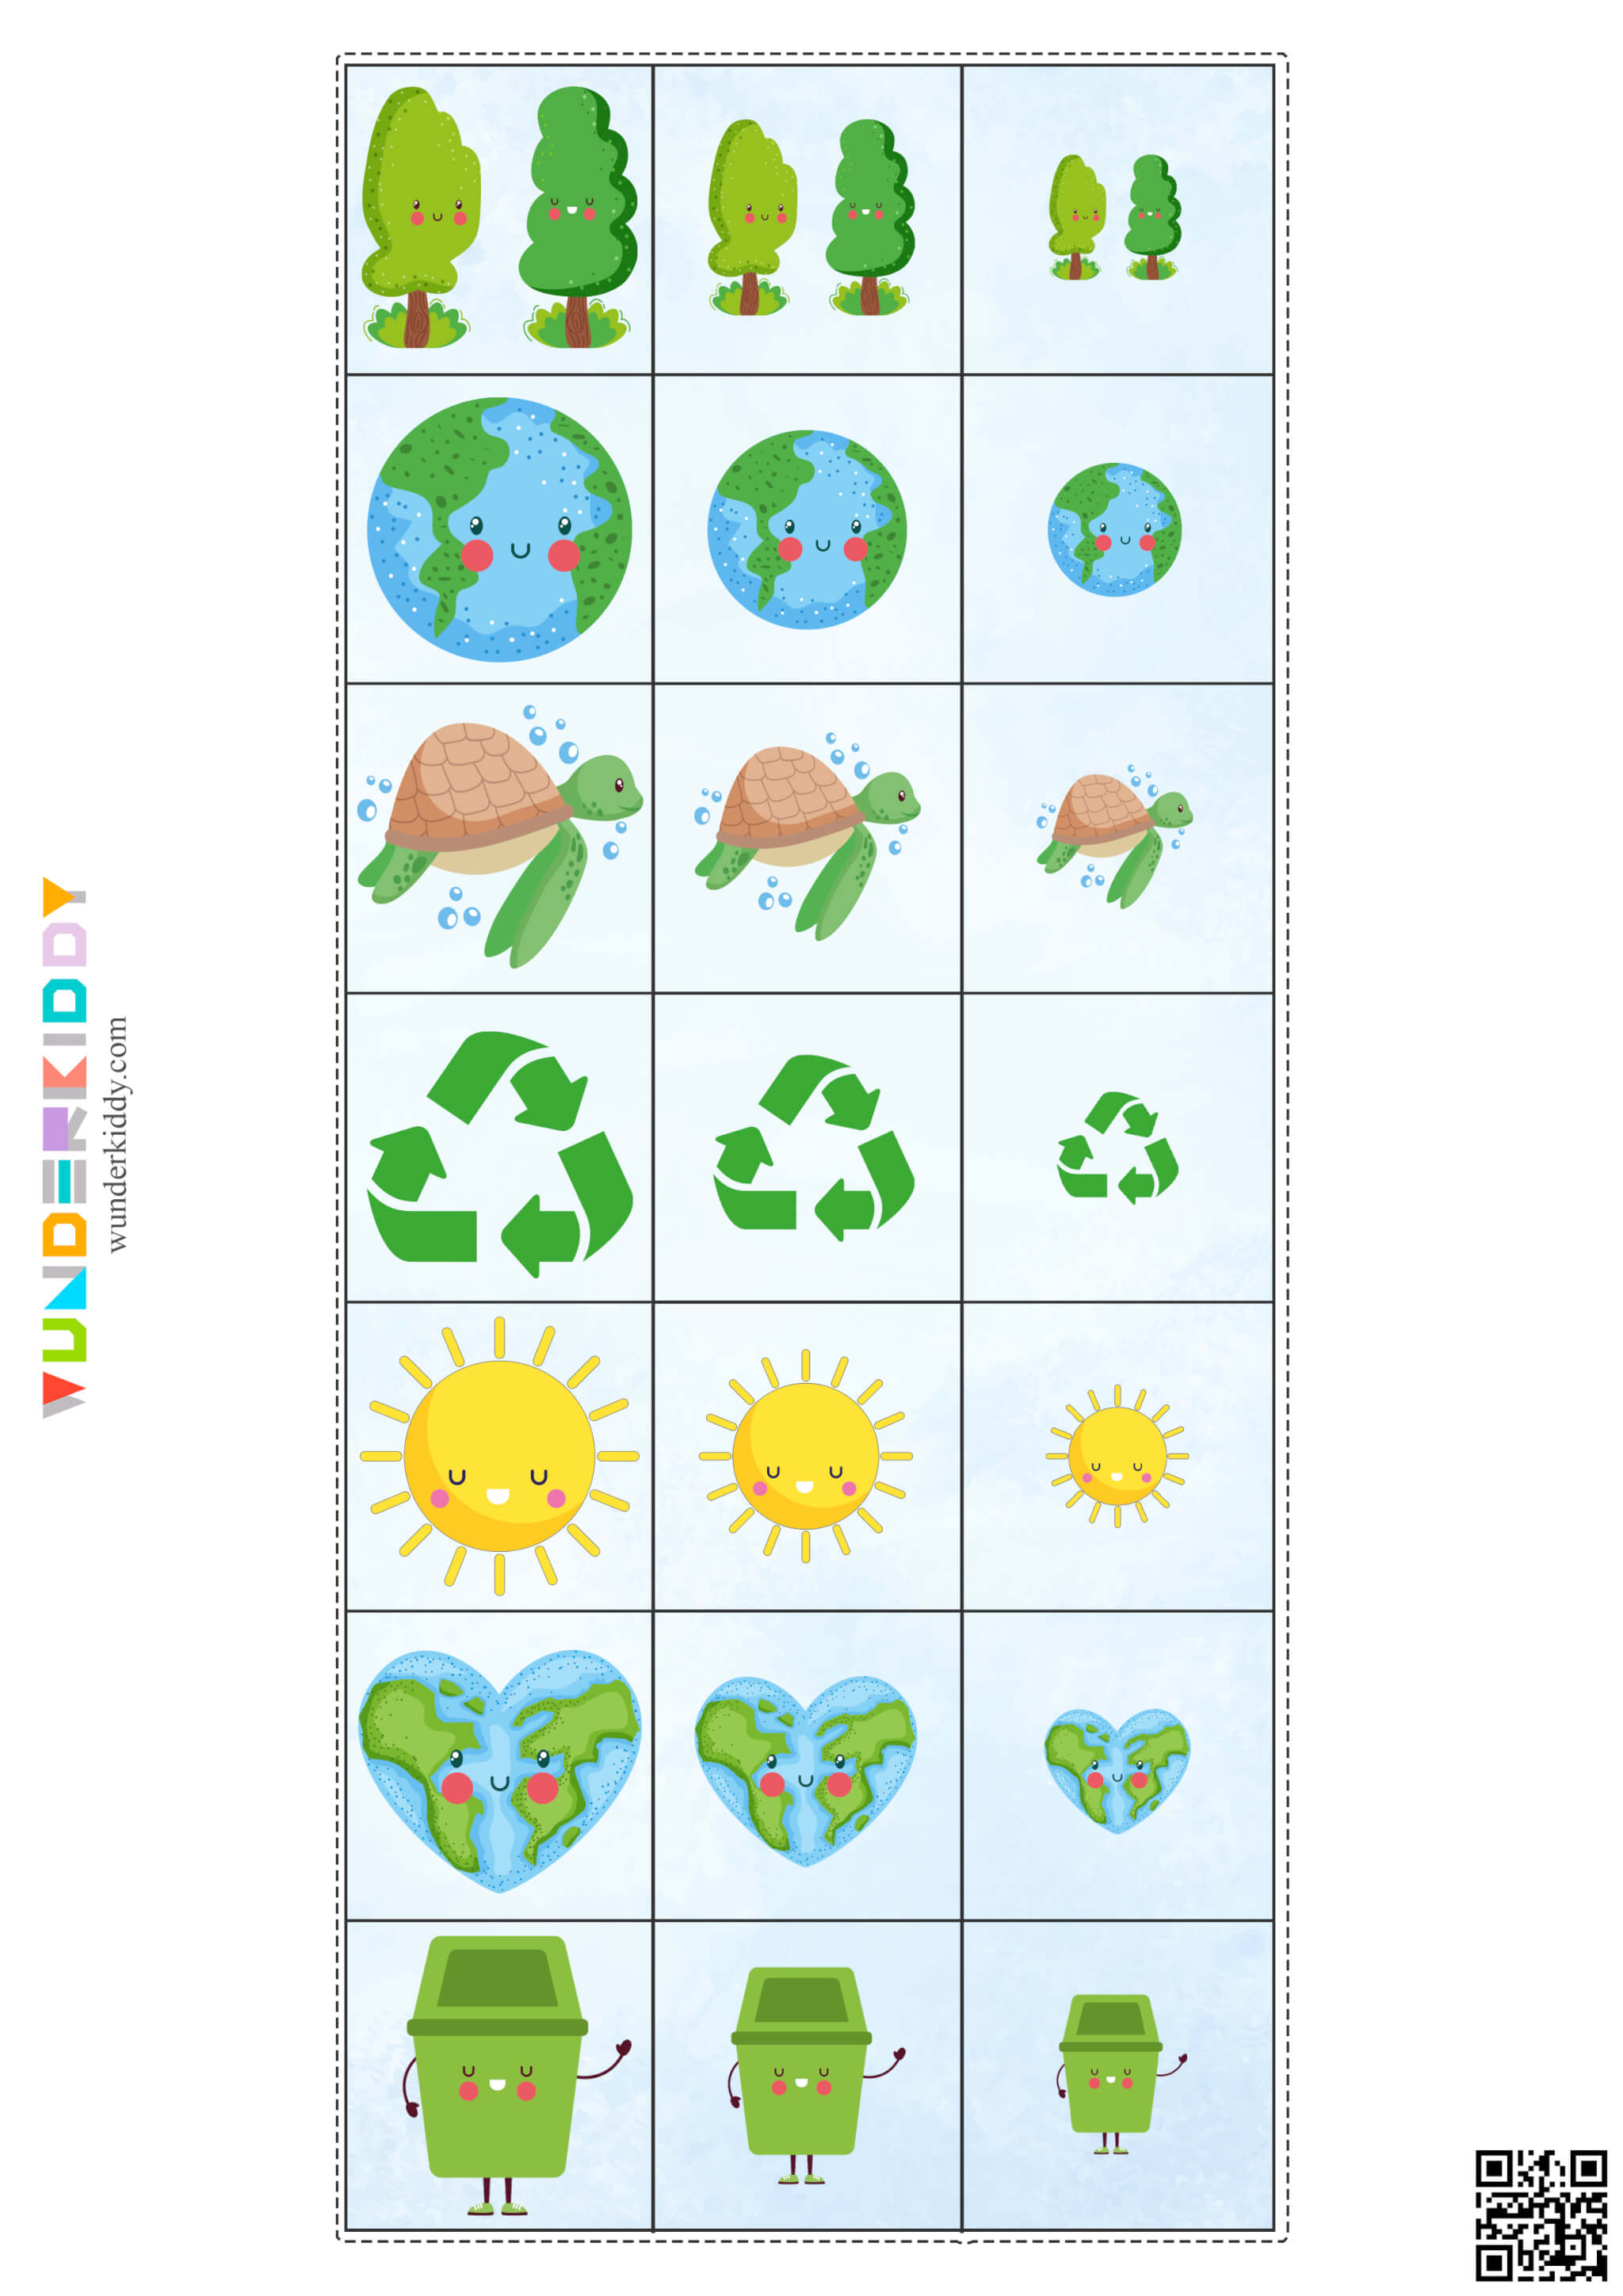 Earth Day Size Sorting Activity - Image 3